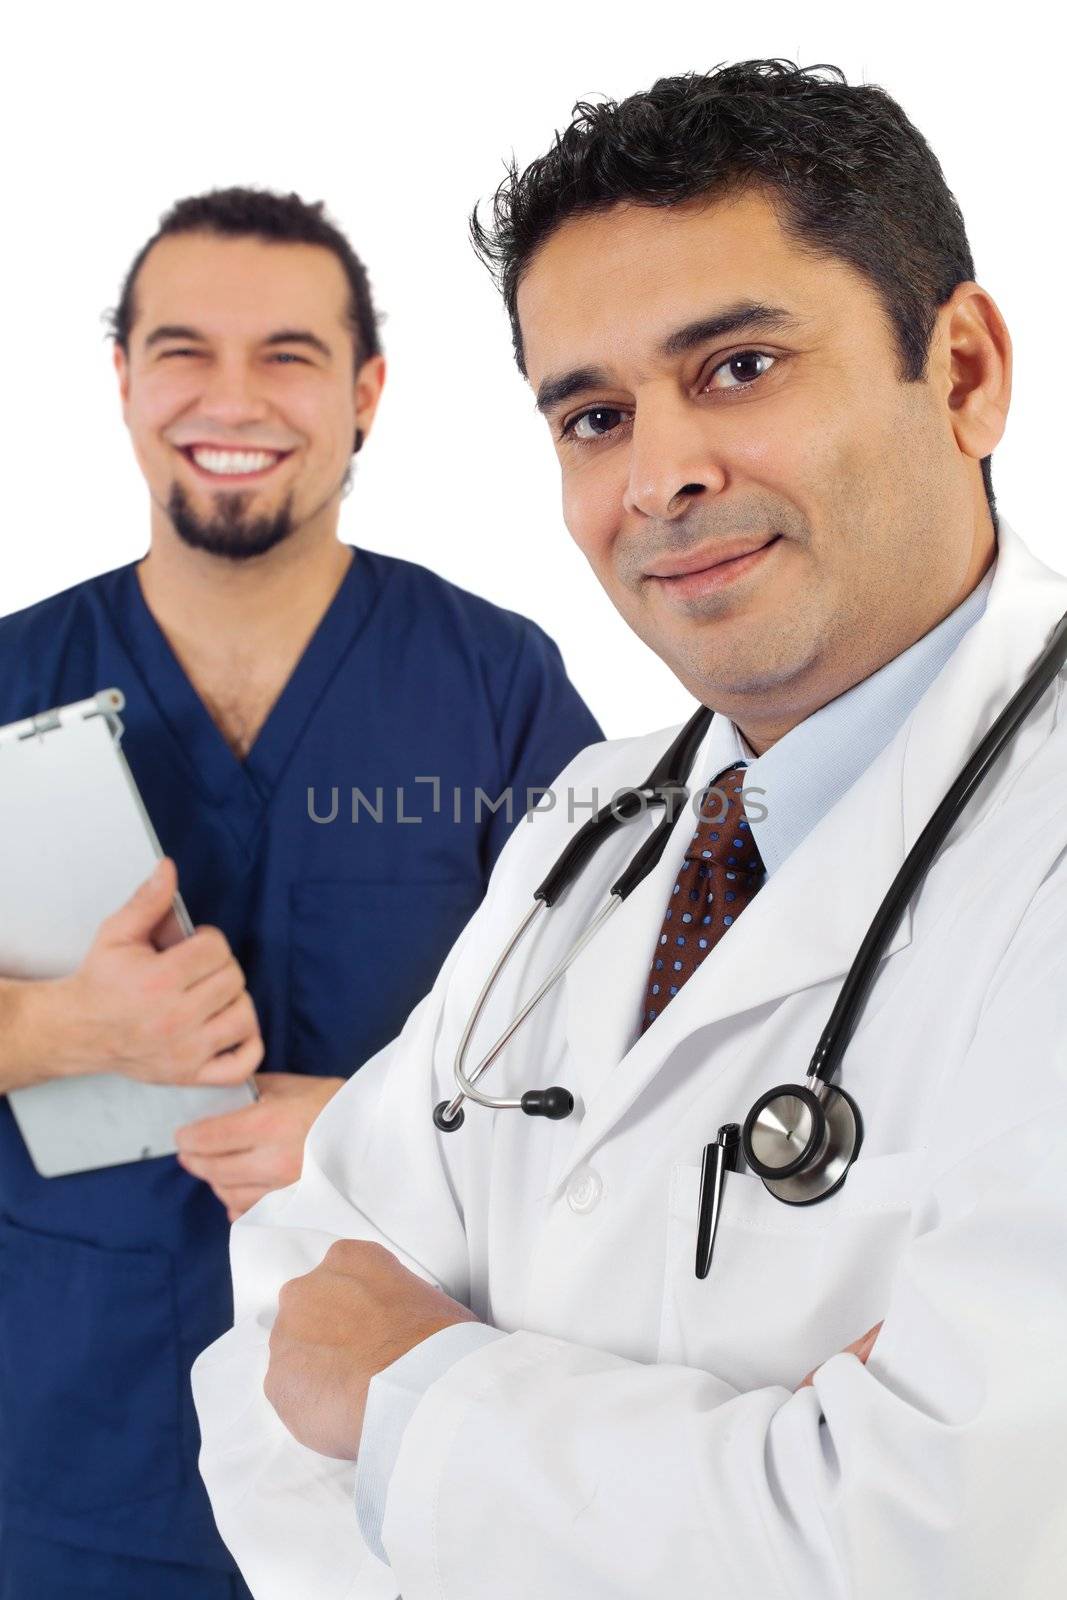 Smiling medical professionals by sumners